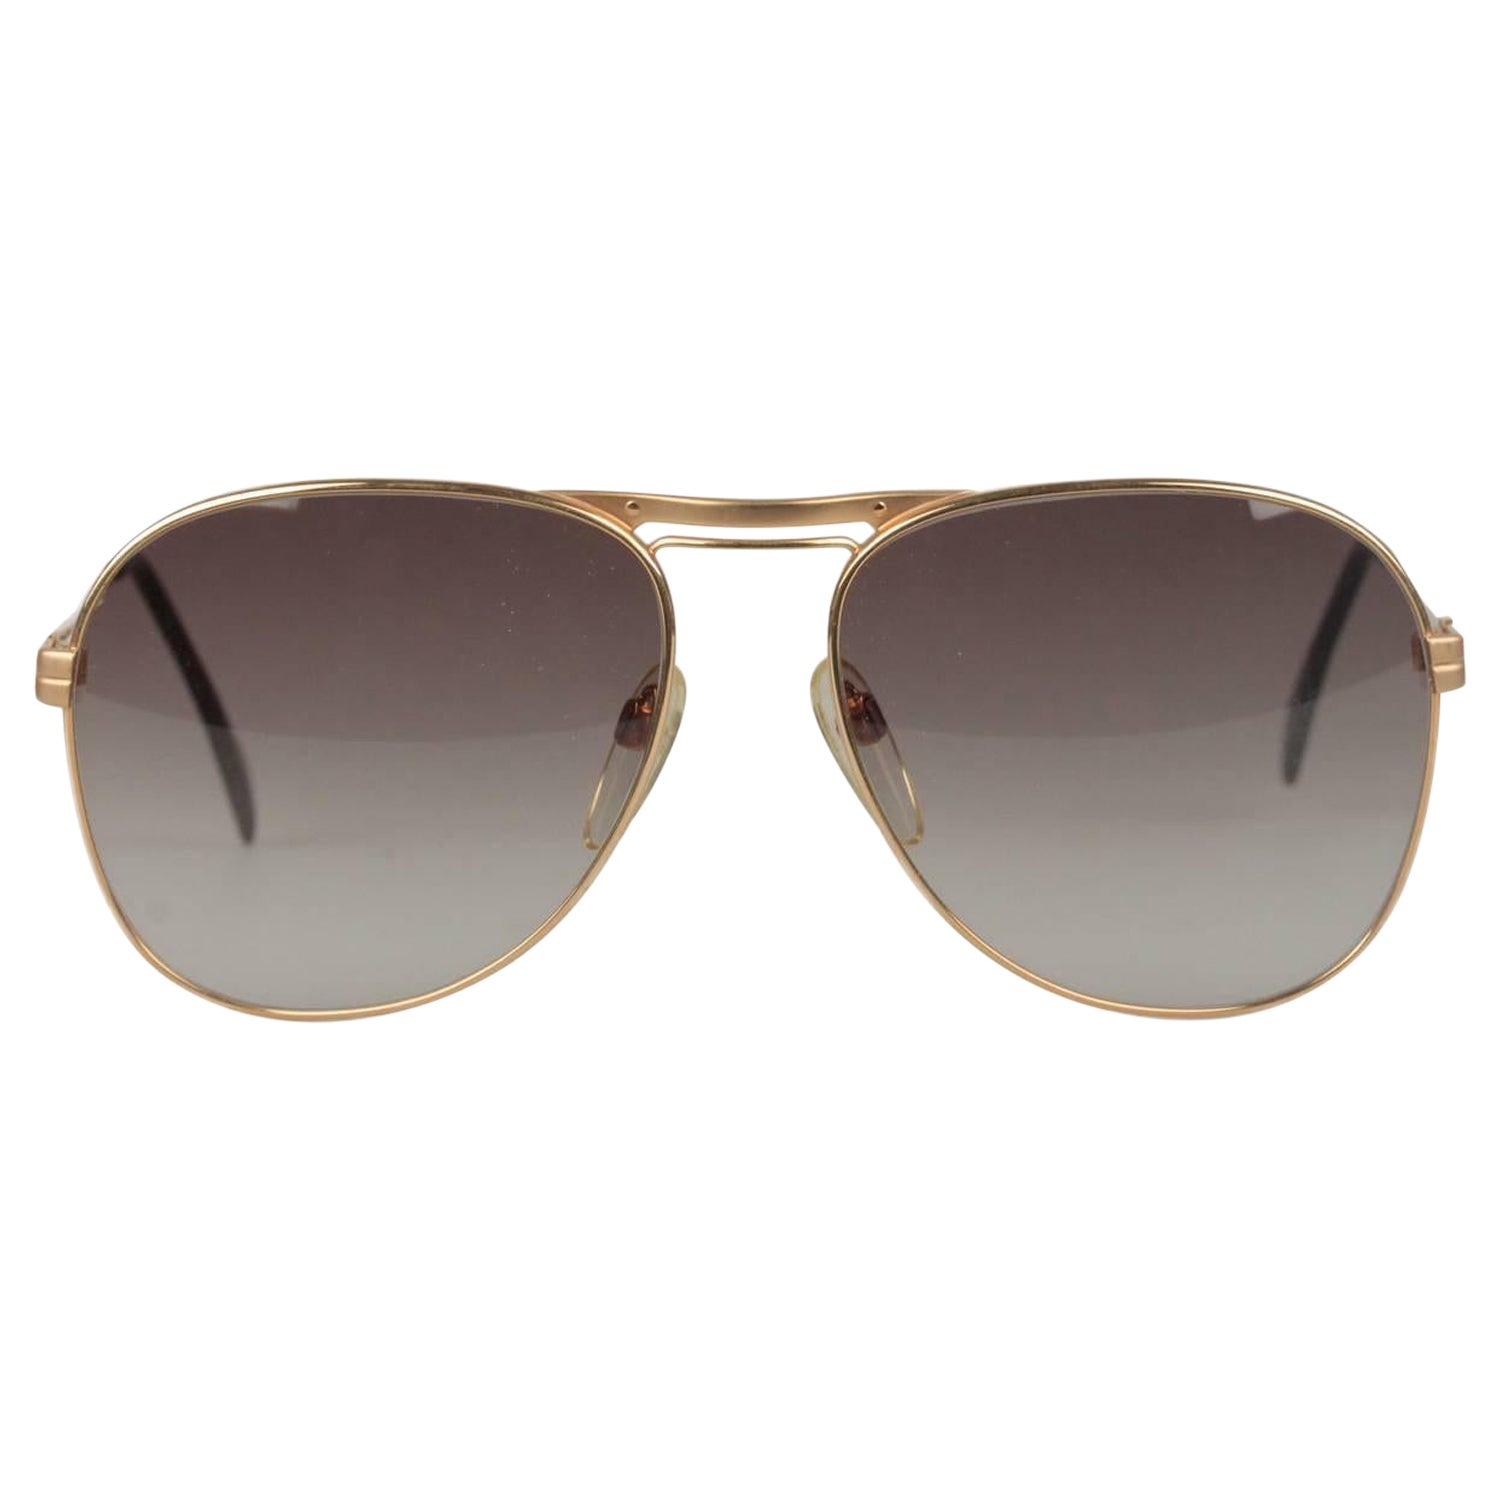 Silhouette Vintage Aviator Gold Metal Sunglasses M7019 58/16 135 mm For Sale